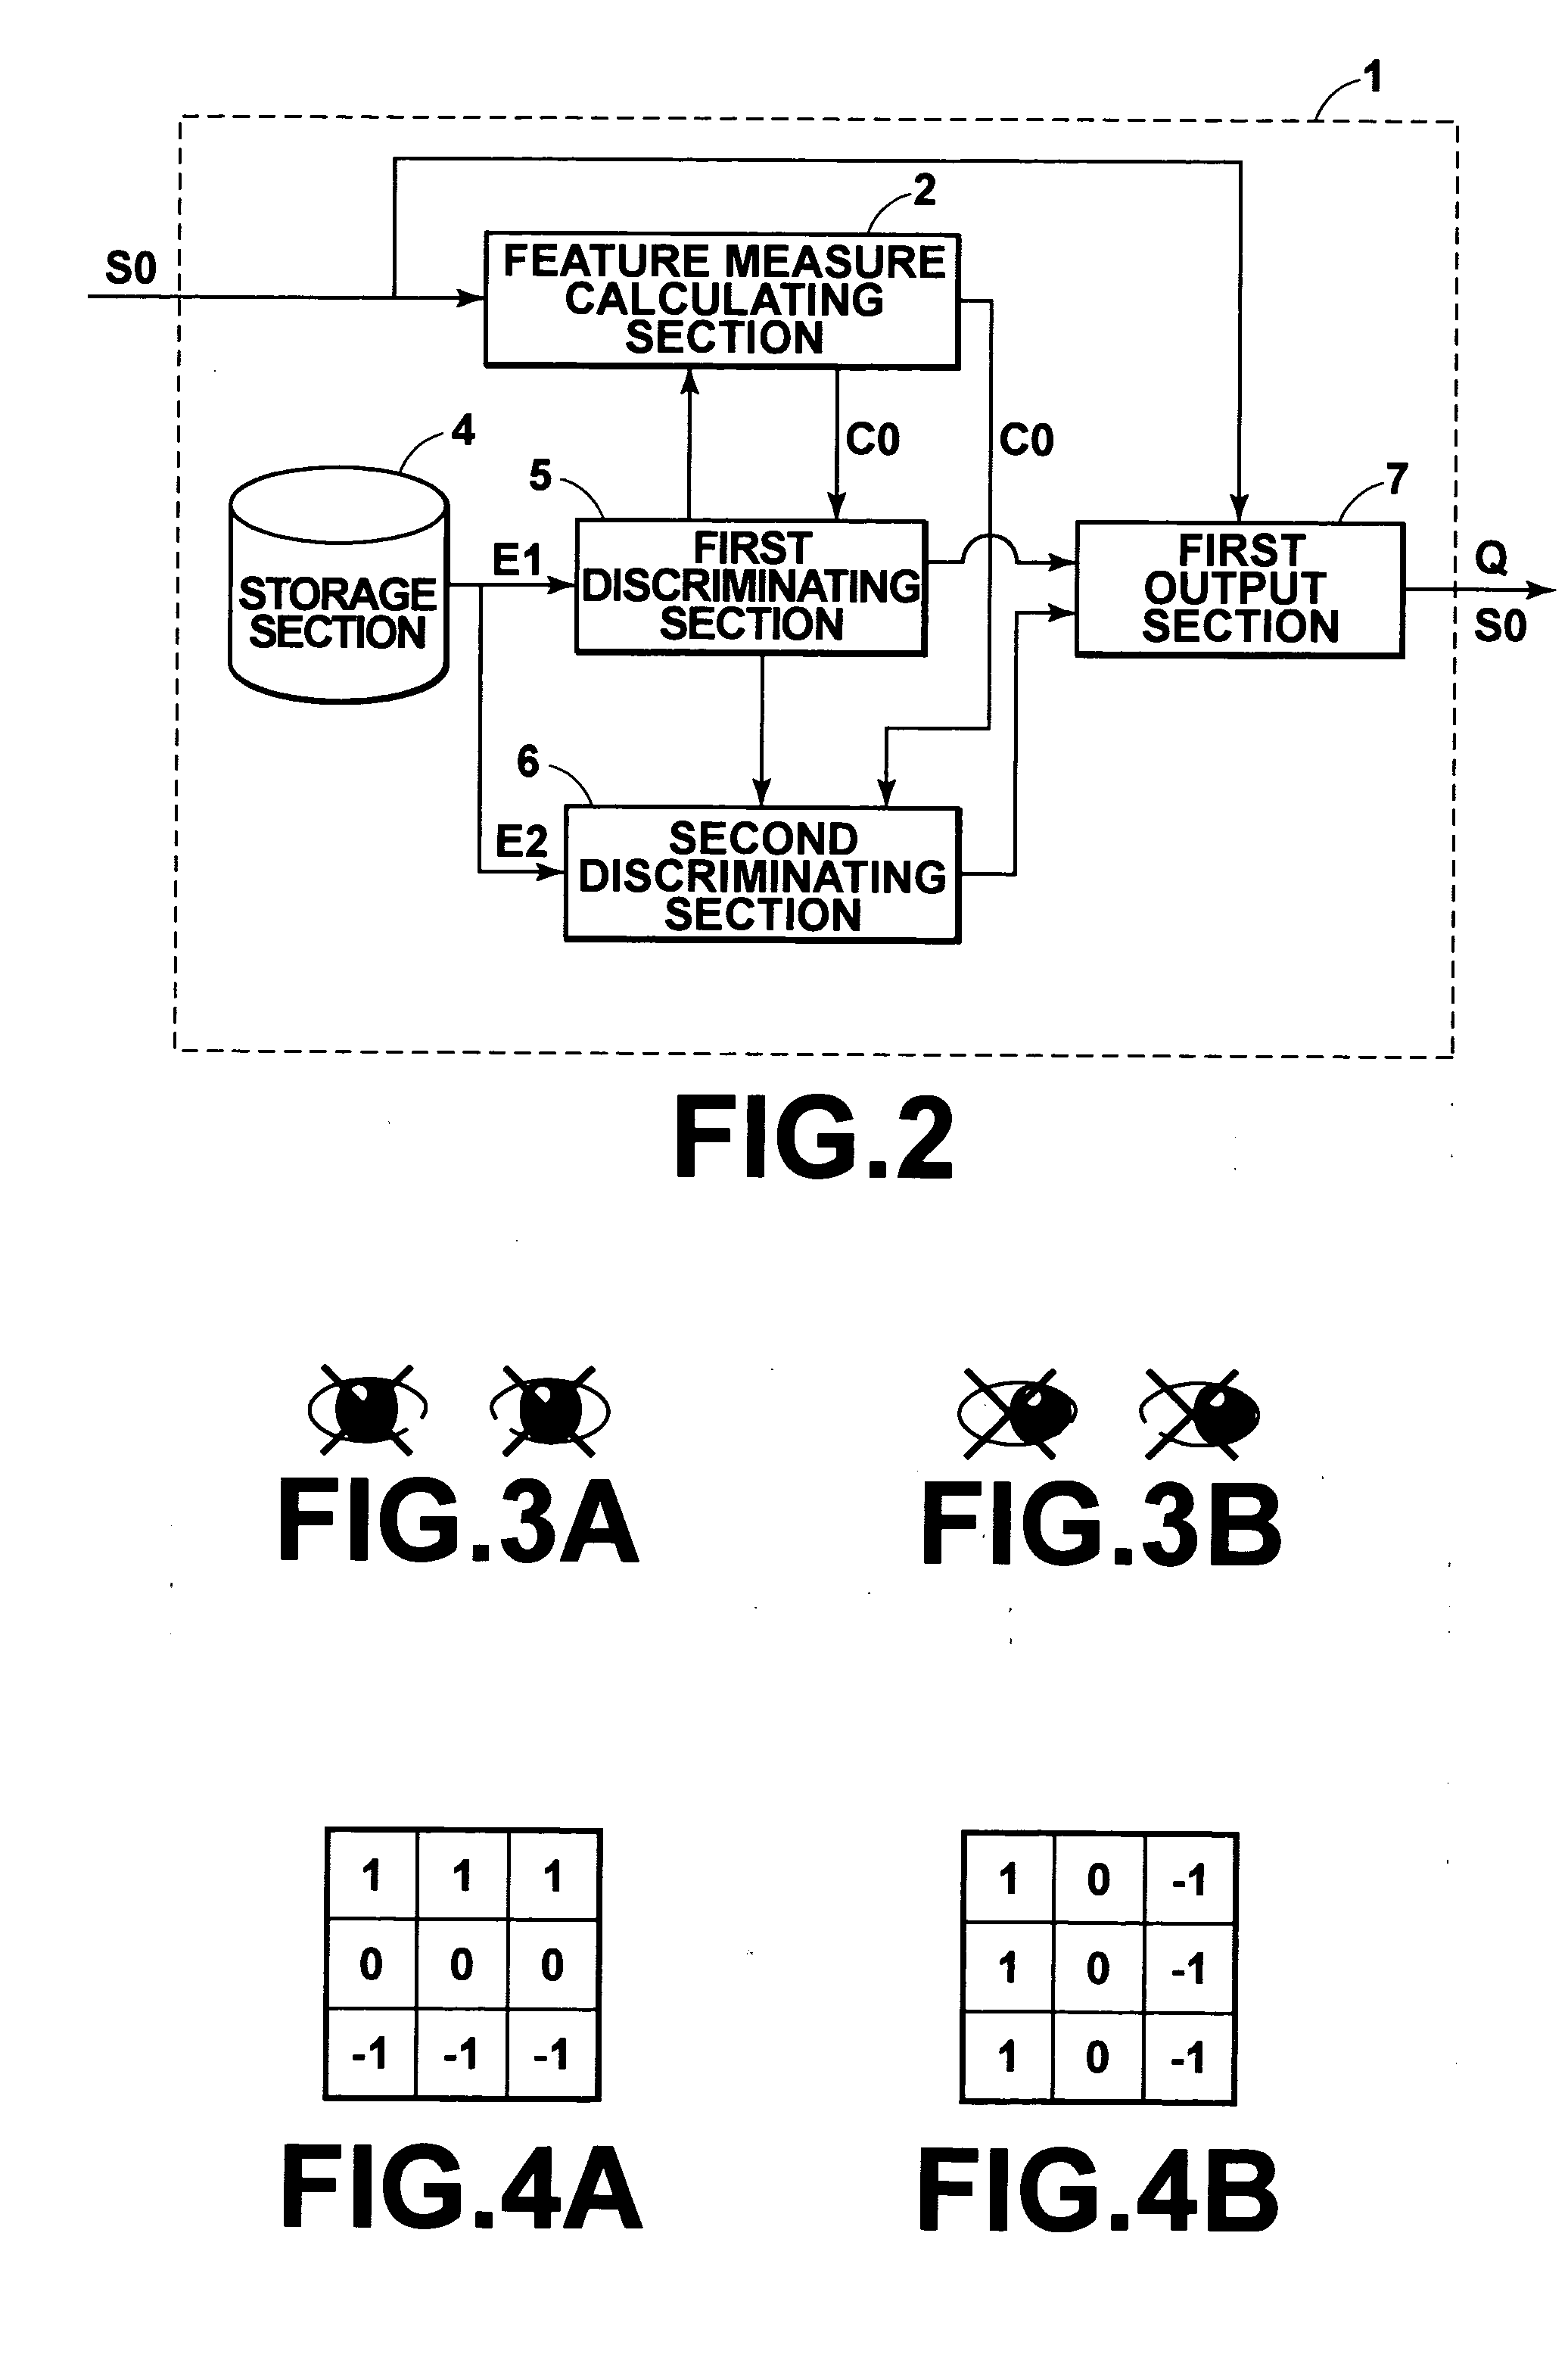 Method and apparatus for detecting positions of center points of circular patterns